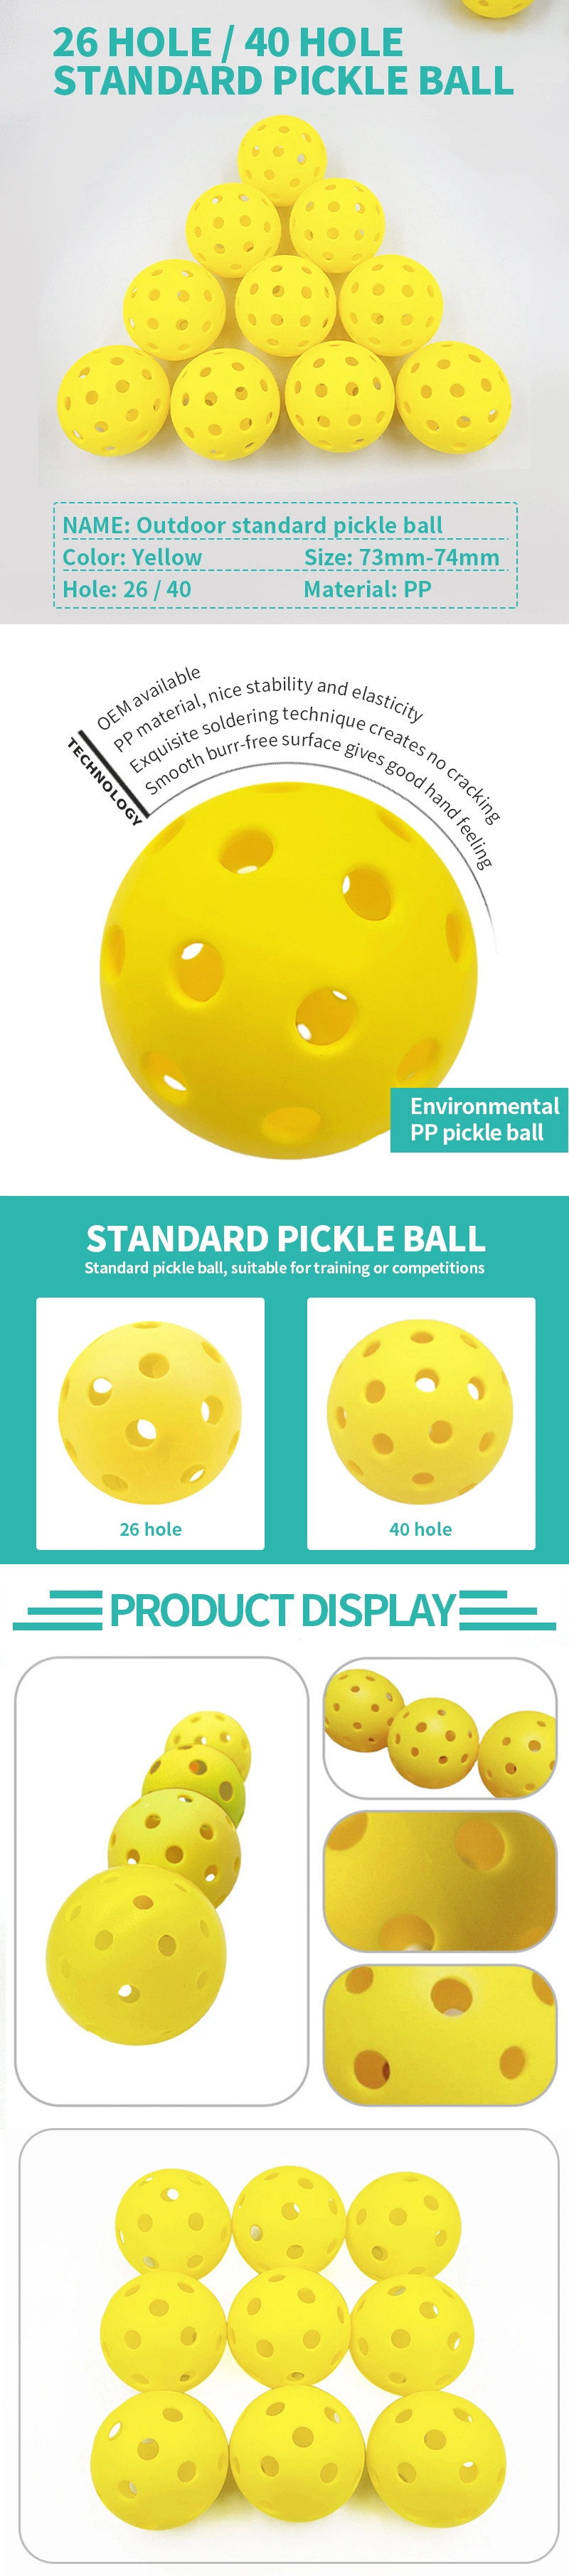 Custom Pickle Ball 74 mm 40 Hole Practice Ball High Quality and Durable Indoor Outdoor Pickleball